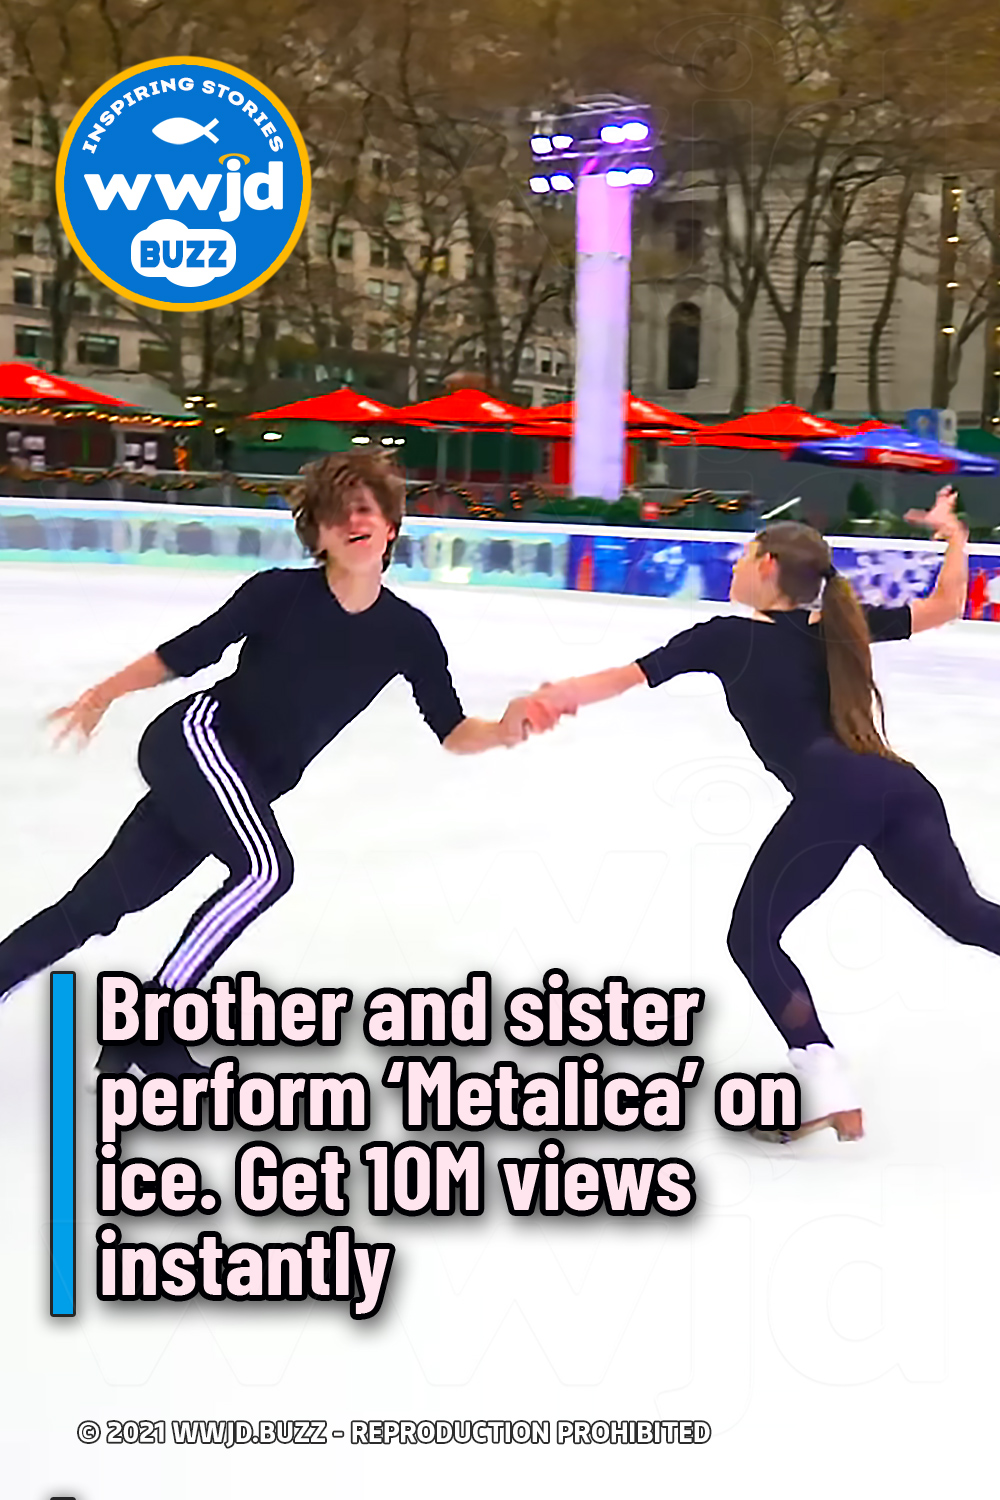 Brother and sister perform ‘Metalica’ on ice. Get 10M views instantly